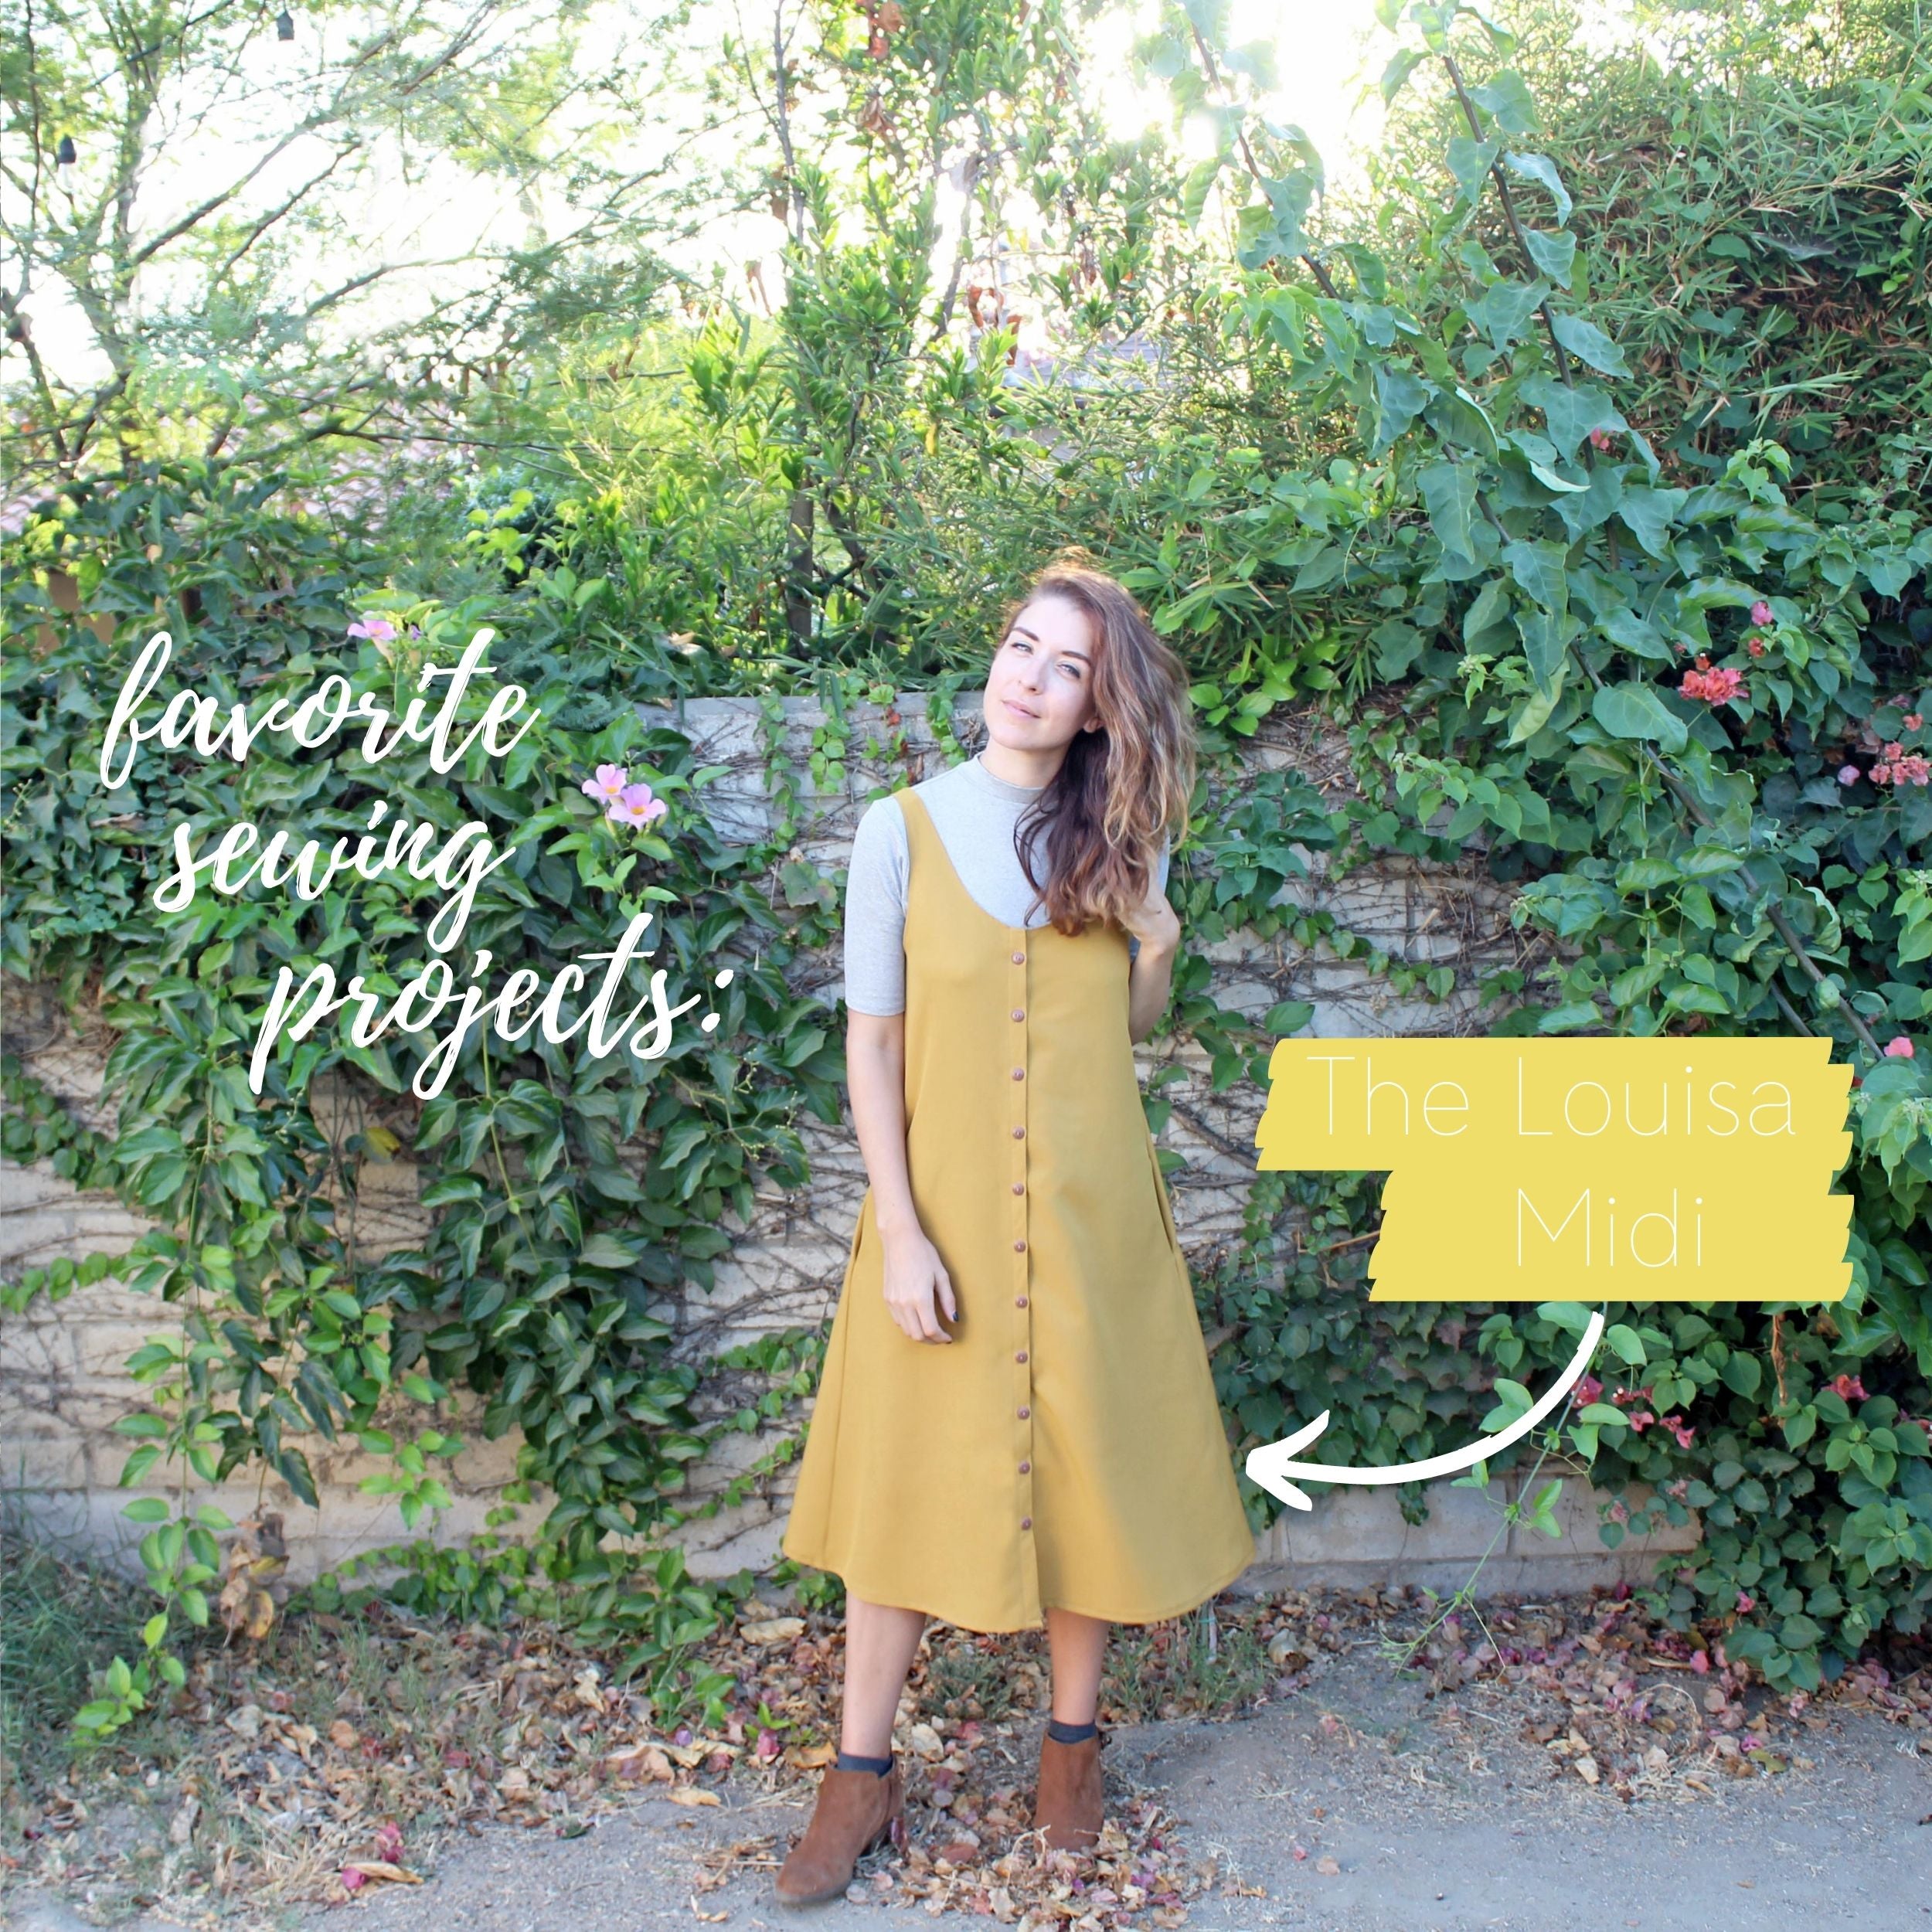 5 Favorite Sewing Projects & Reads The Louisa Midi